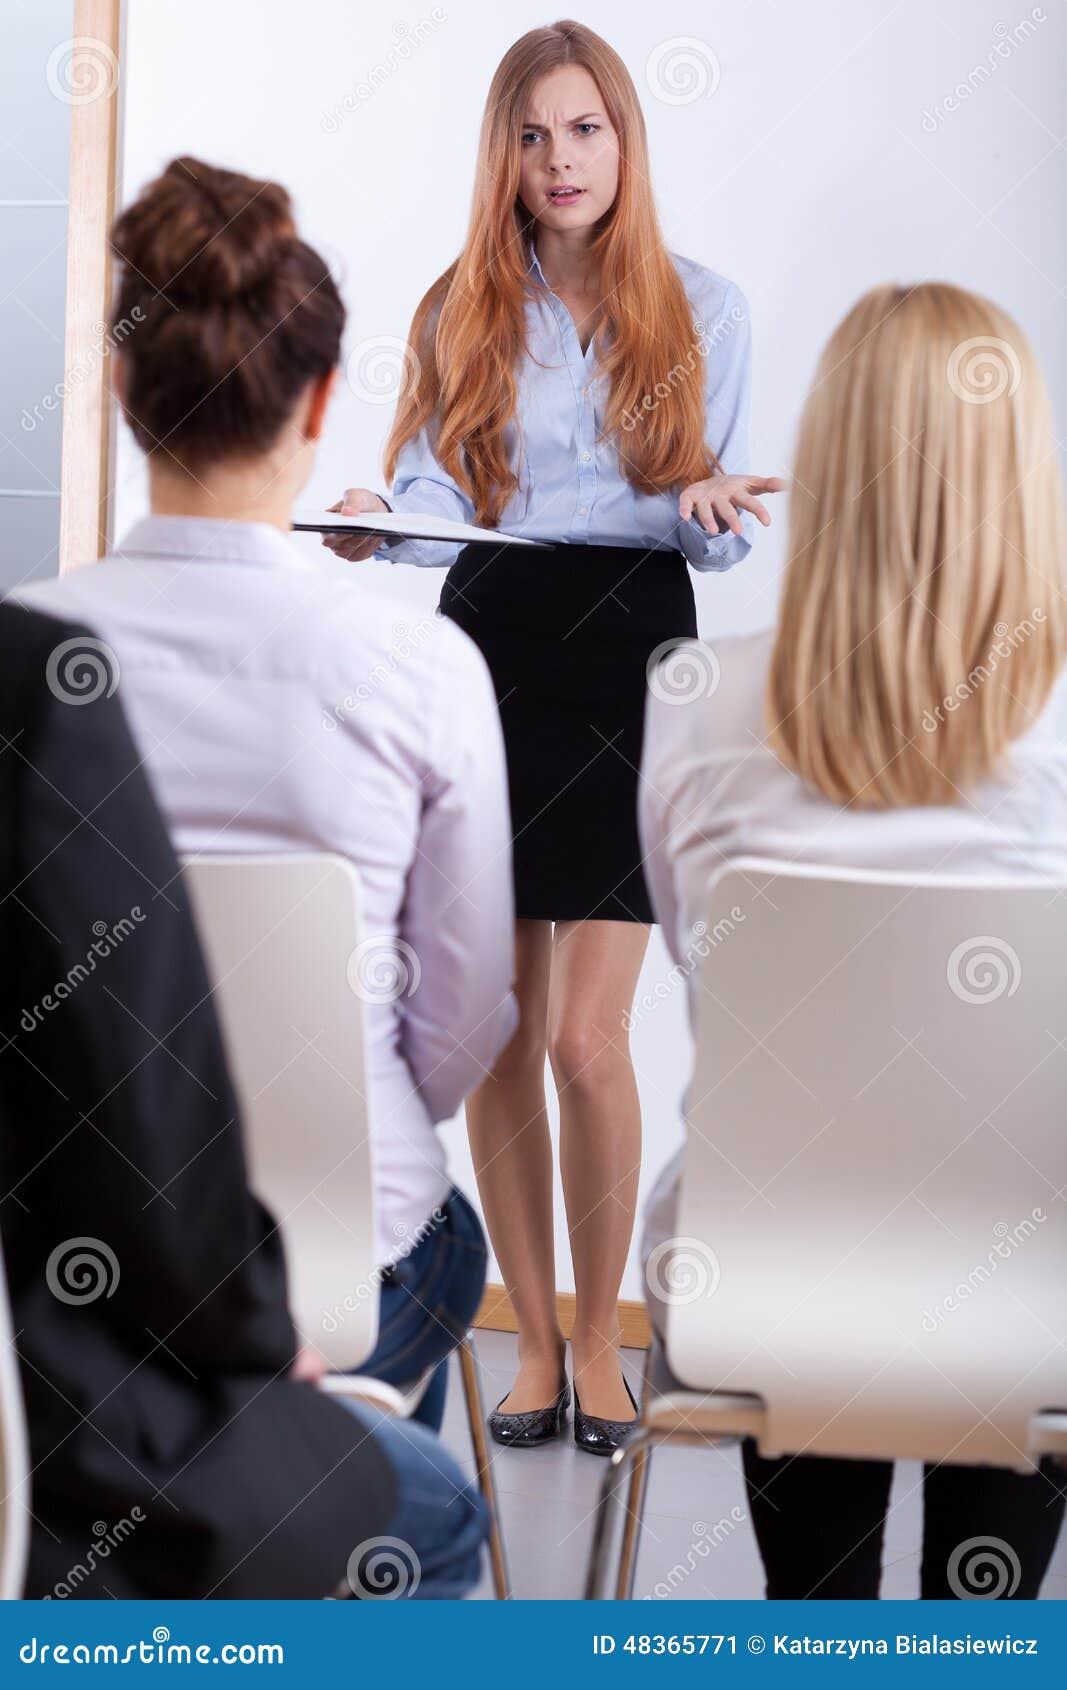 Girl On A Job Interview Stock Image Image Of Recruiting 48365771